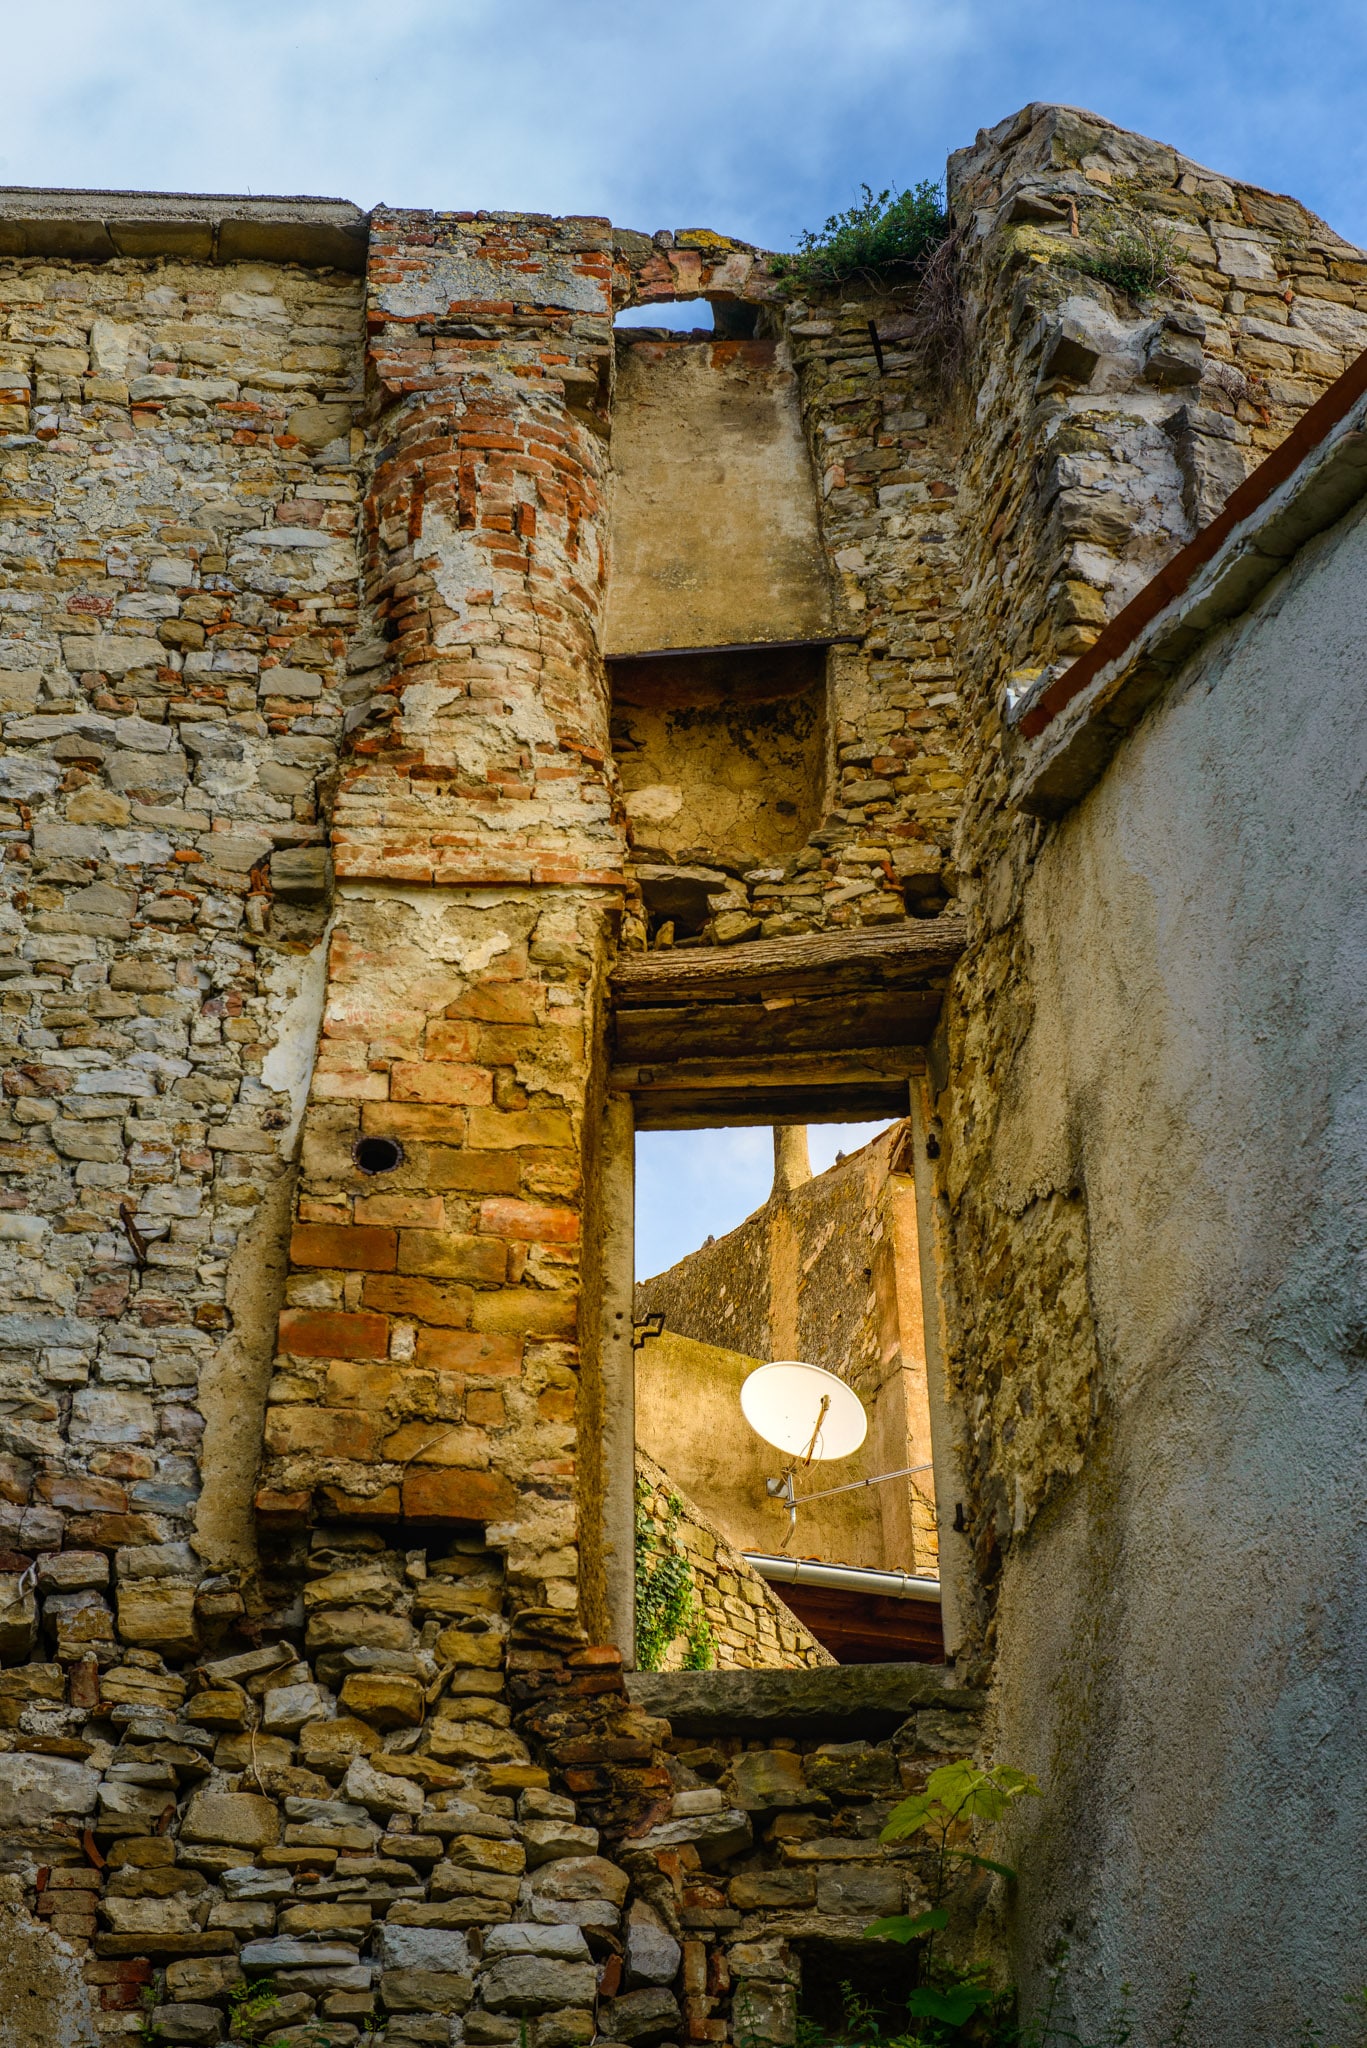 A satellite dish is visible through a window in some ruins in the Medieval Istrian village of Motovun in Croatia.